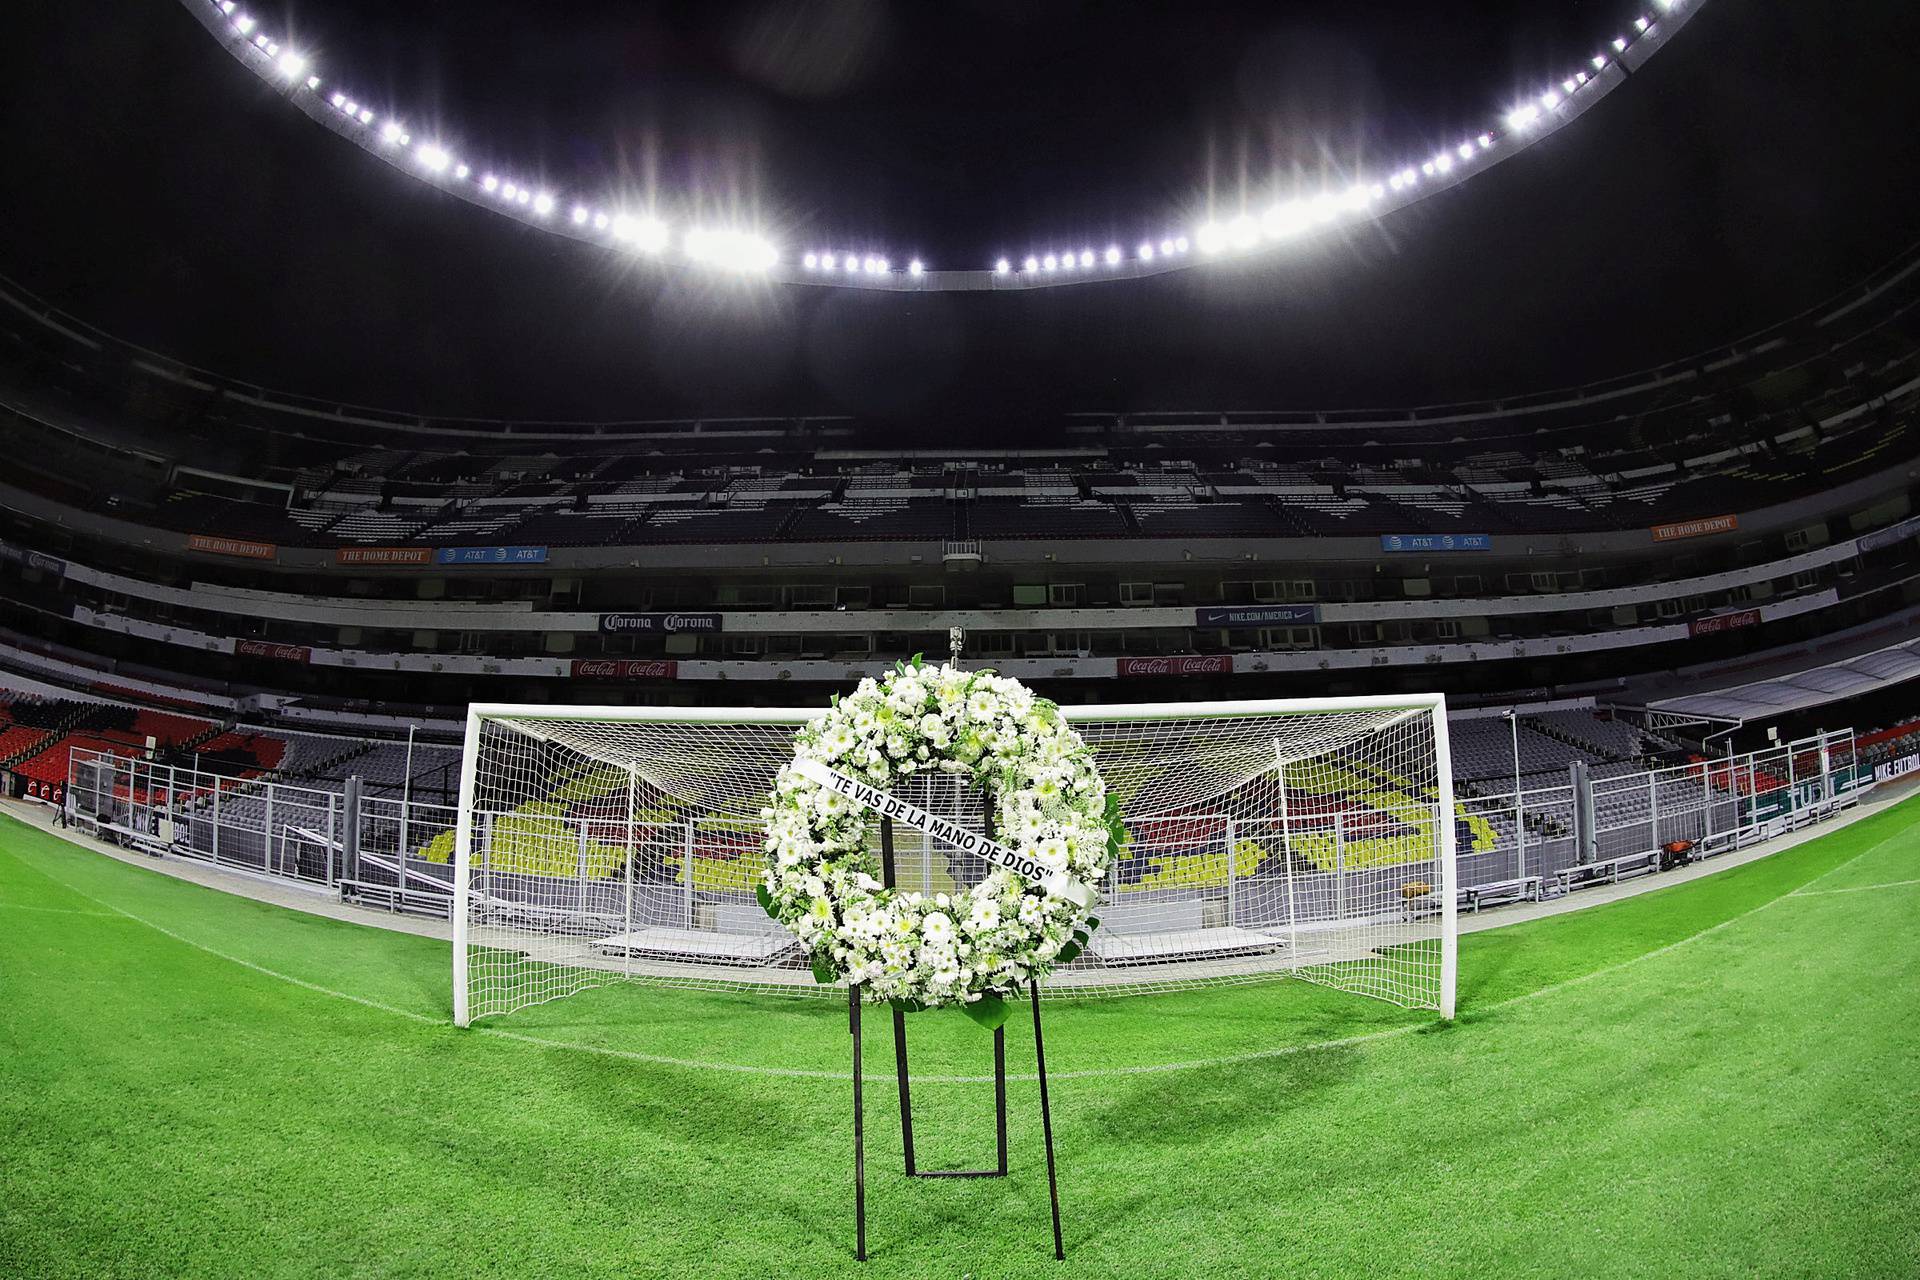 A wreath is placed near the goal where Maradona scored a goal in the 1986 World Cup, in Mexico City